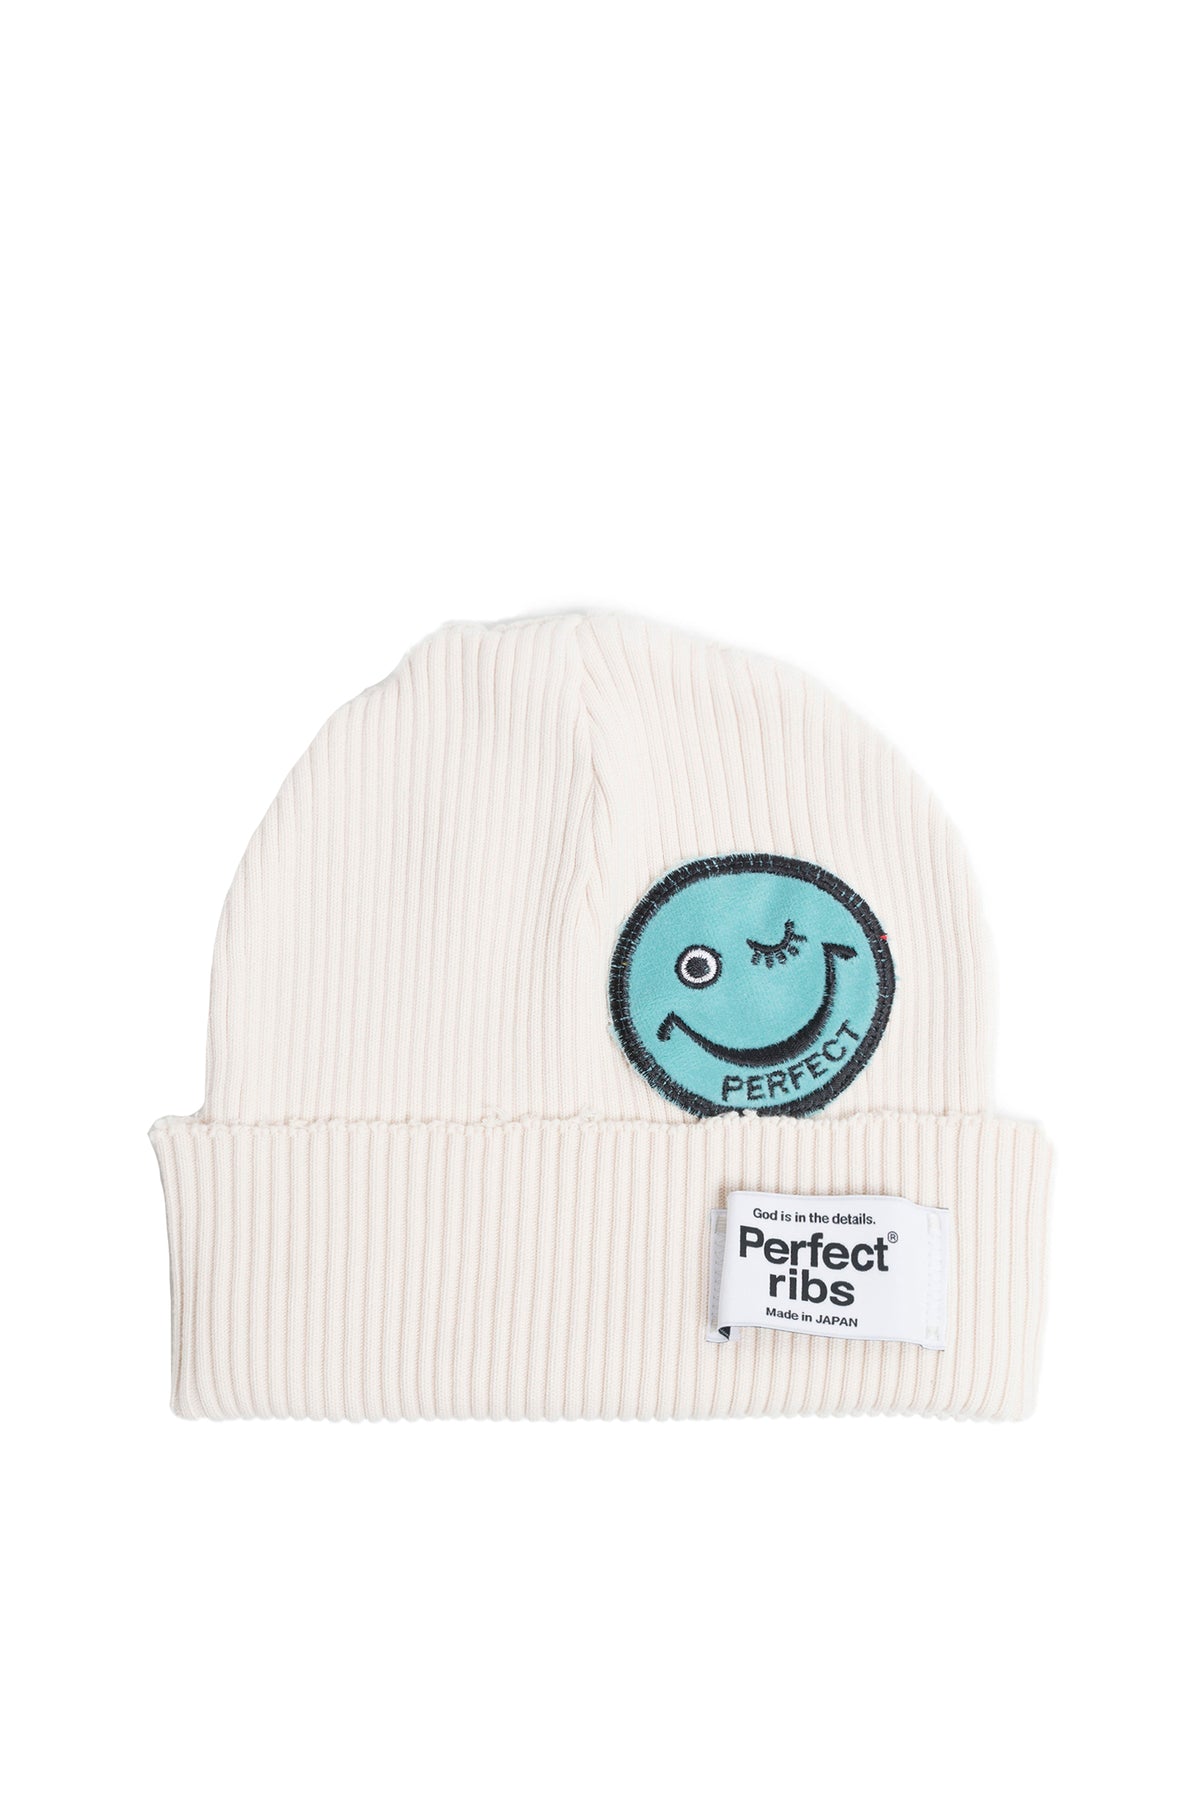 Perfect ribs RIB BEANIE CAP "SMILE PATCH" / OAT